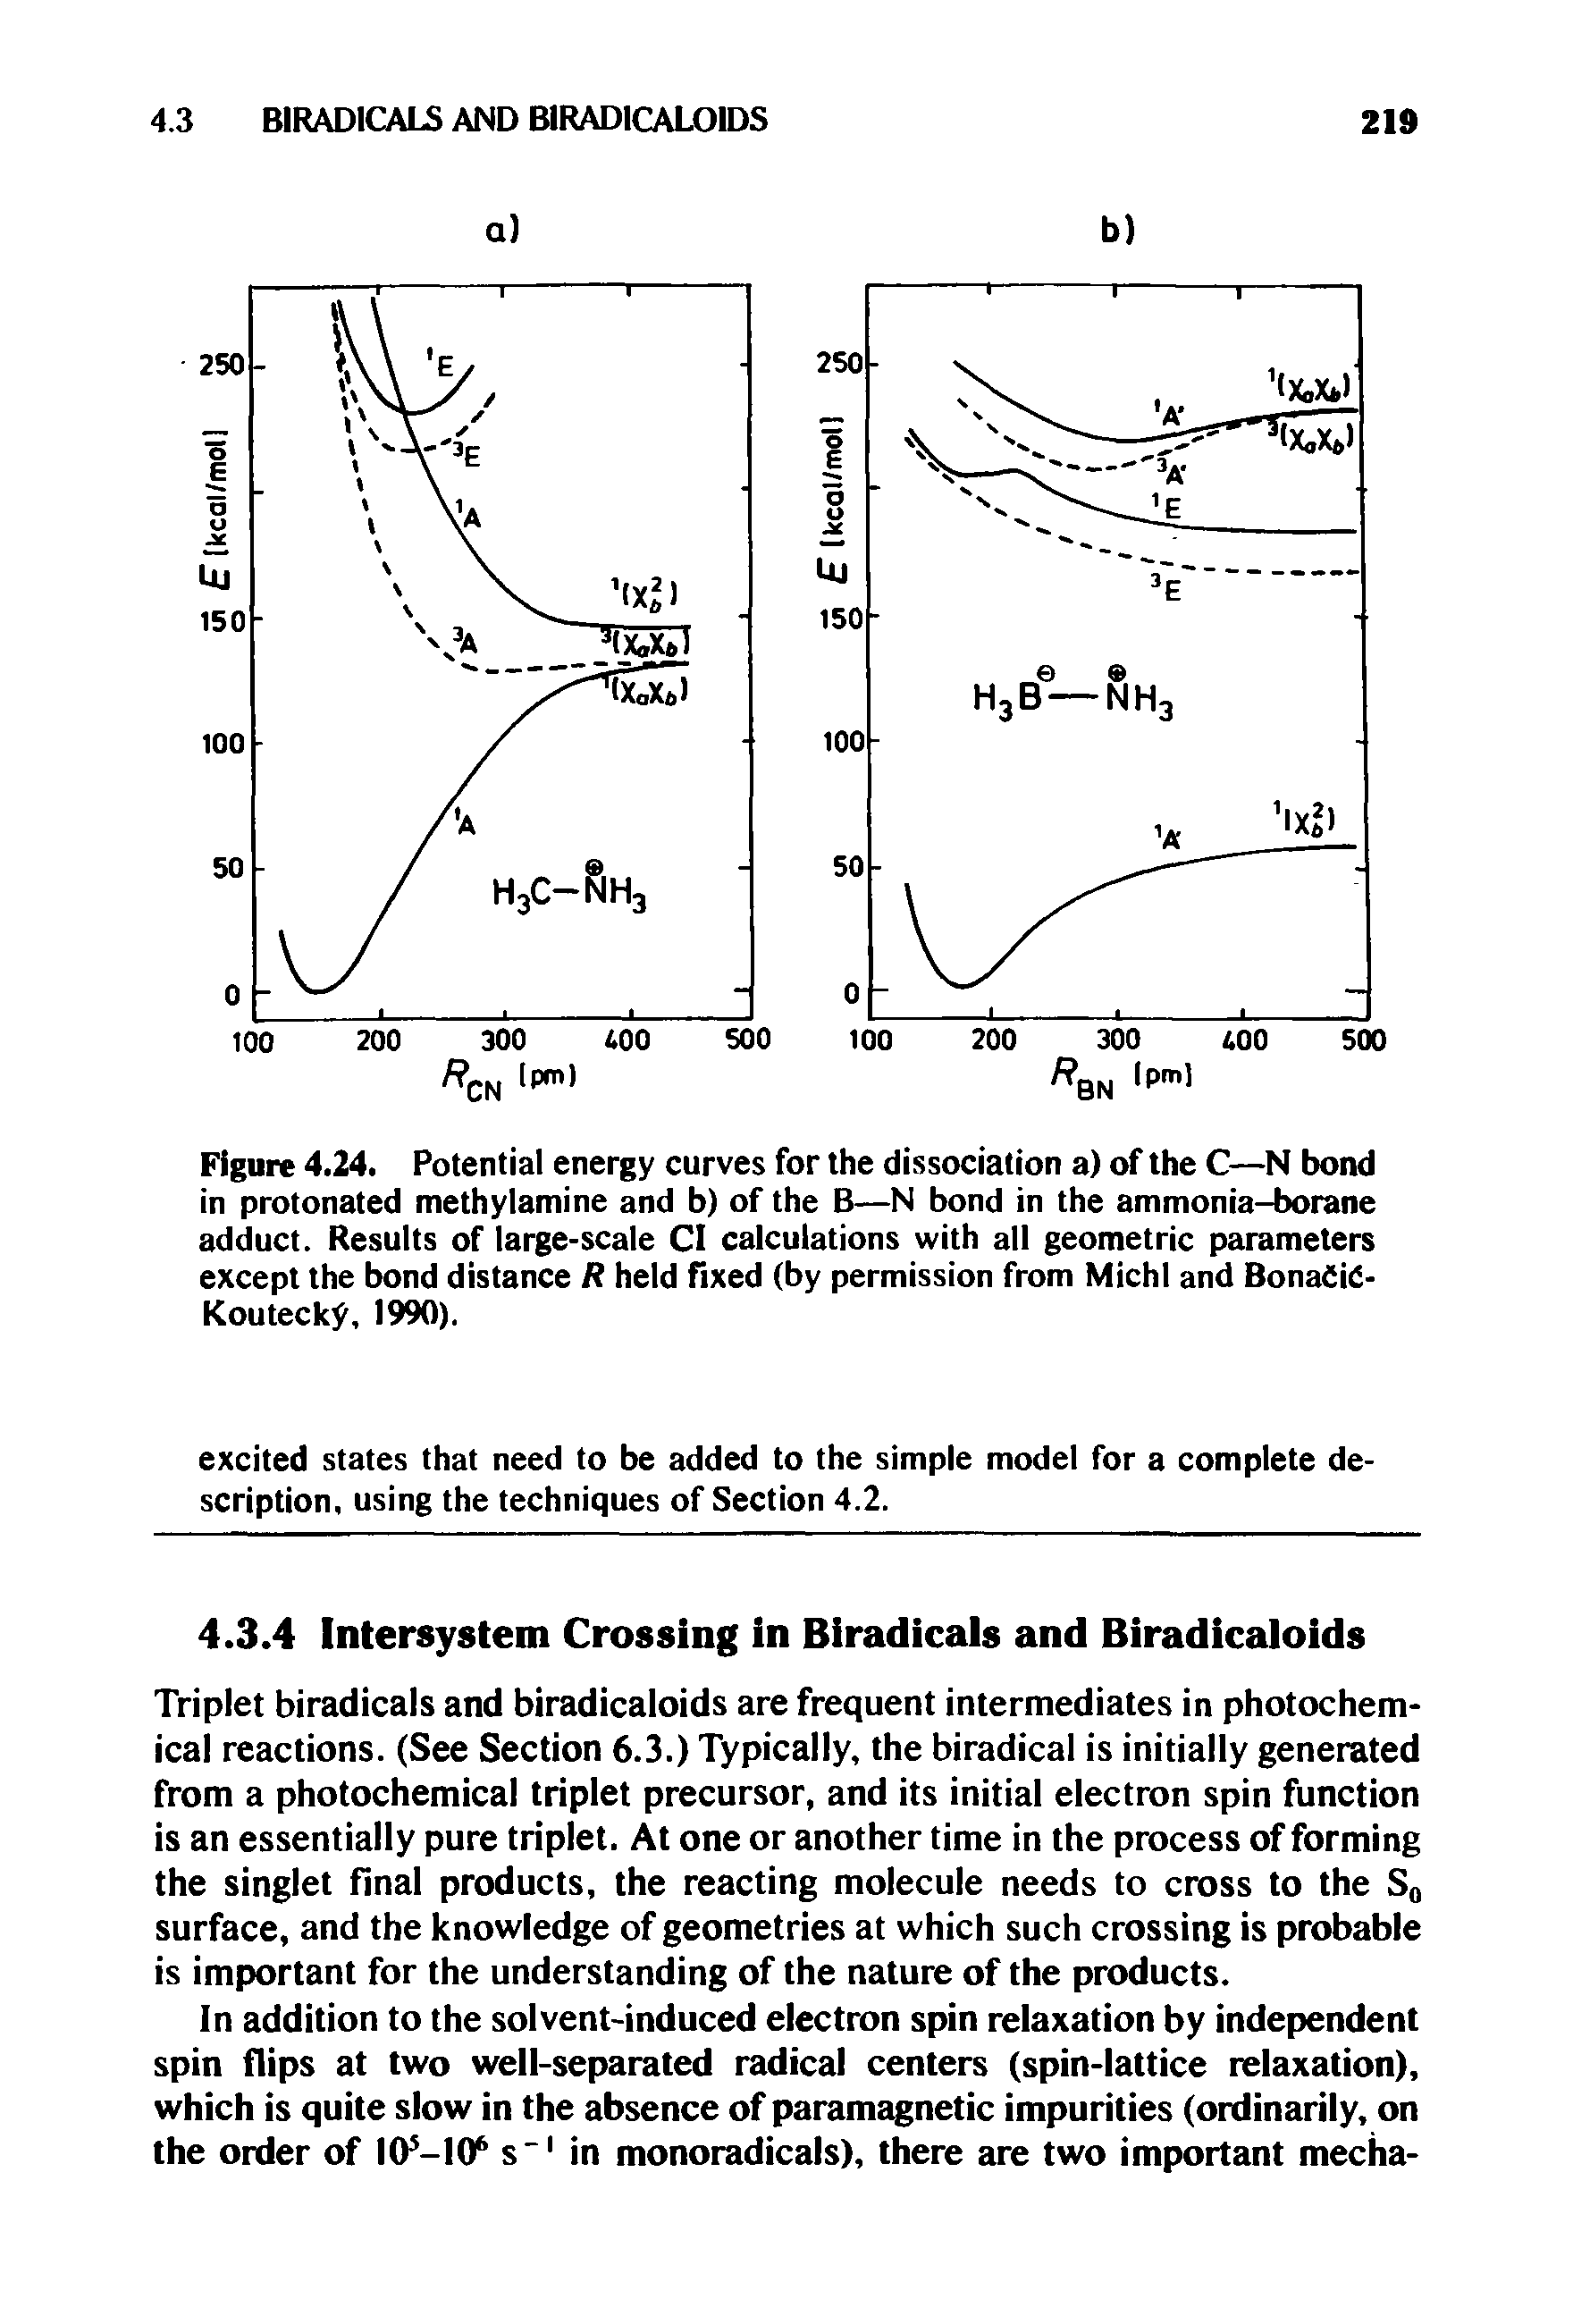 Figure 4.24. Potential energy curves for the dissociation a) of the C—N bond in protonated methylamine and b) of the B—N bond in the ammonia-borane adduct. Results of large-scale Cl calculations with all geometric parameters except the bond distance R held fixed (by permission from Michl and BonaCie-Kouteck, 1990).